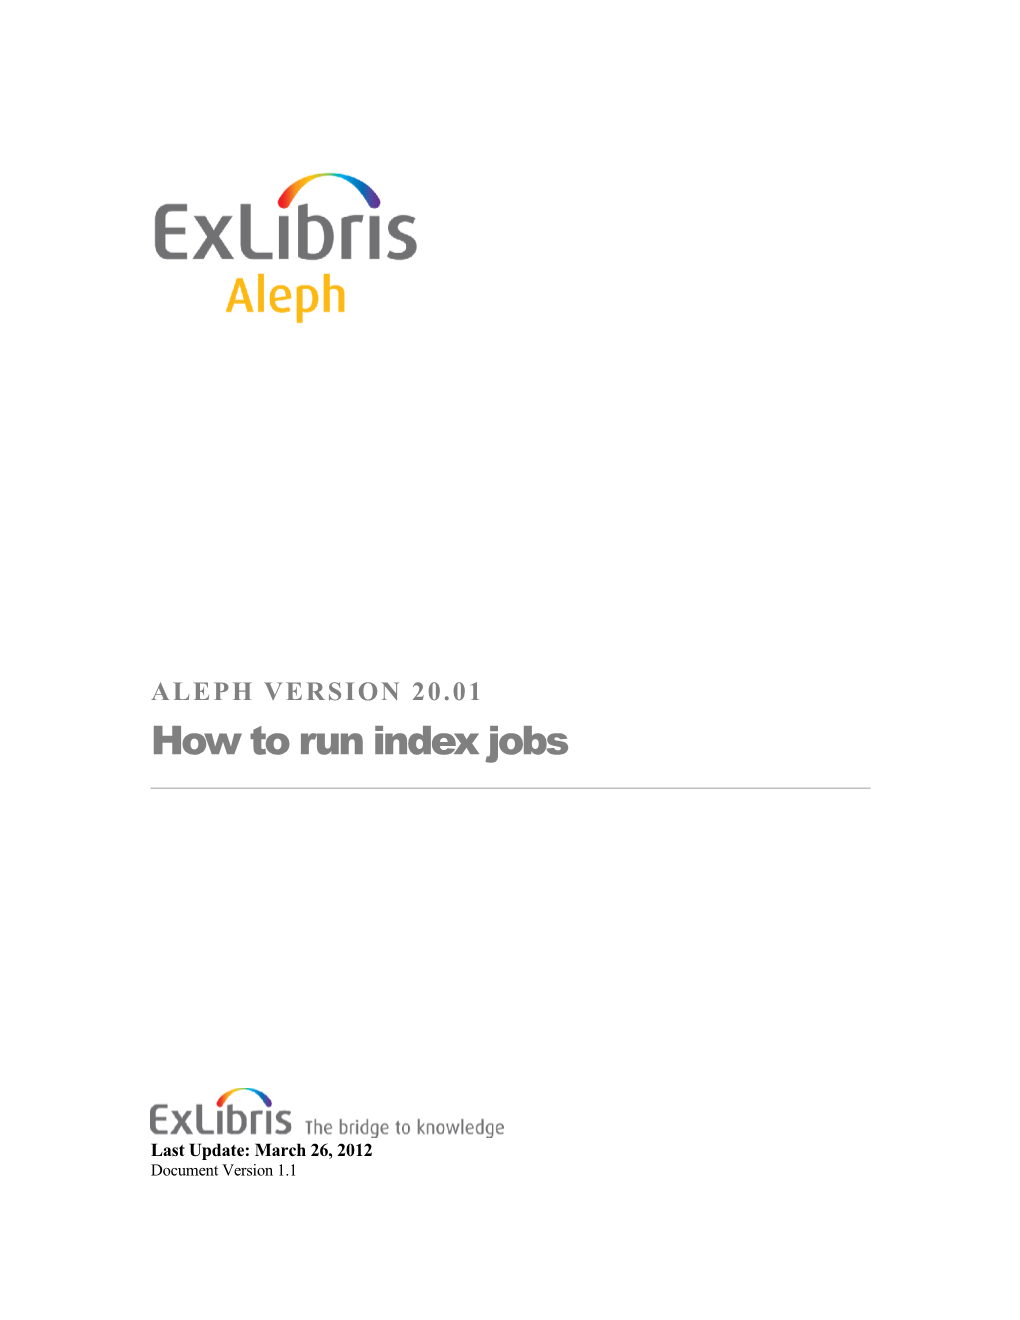 How to Run Index Jobs